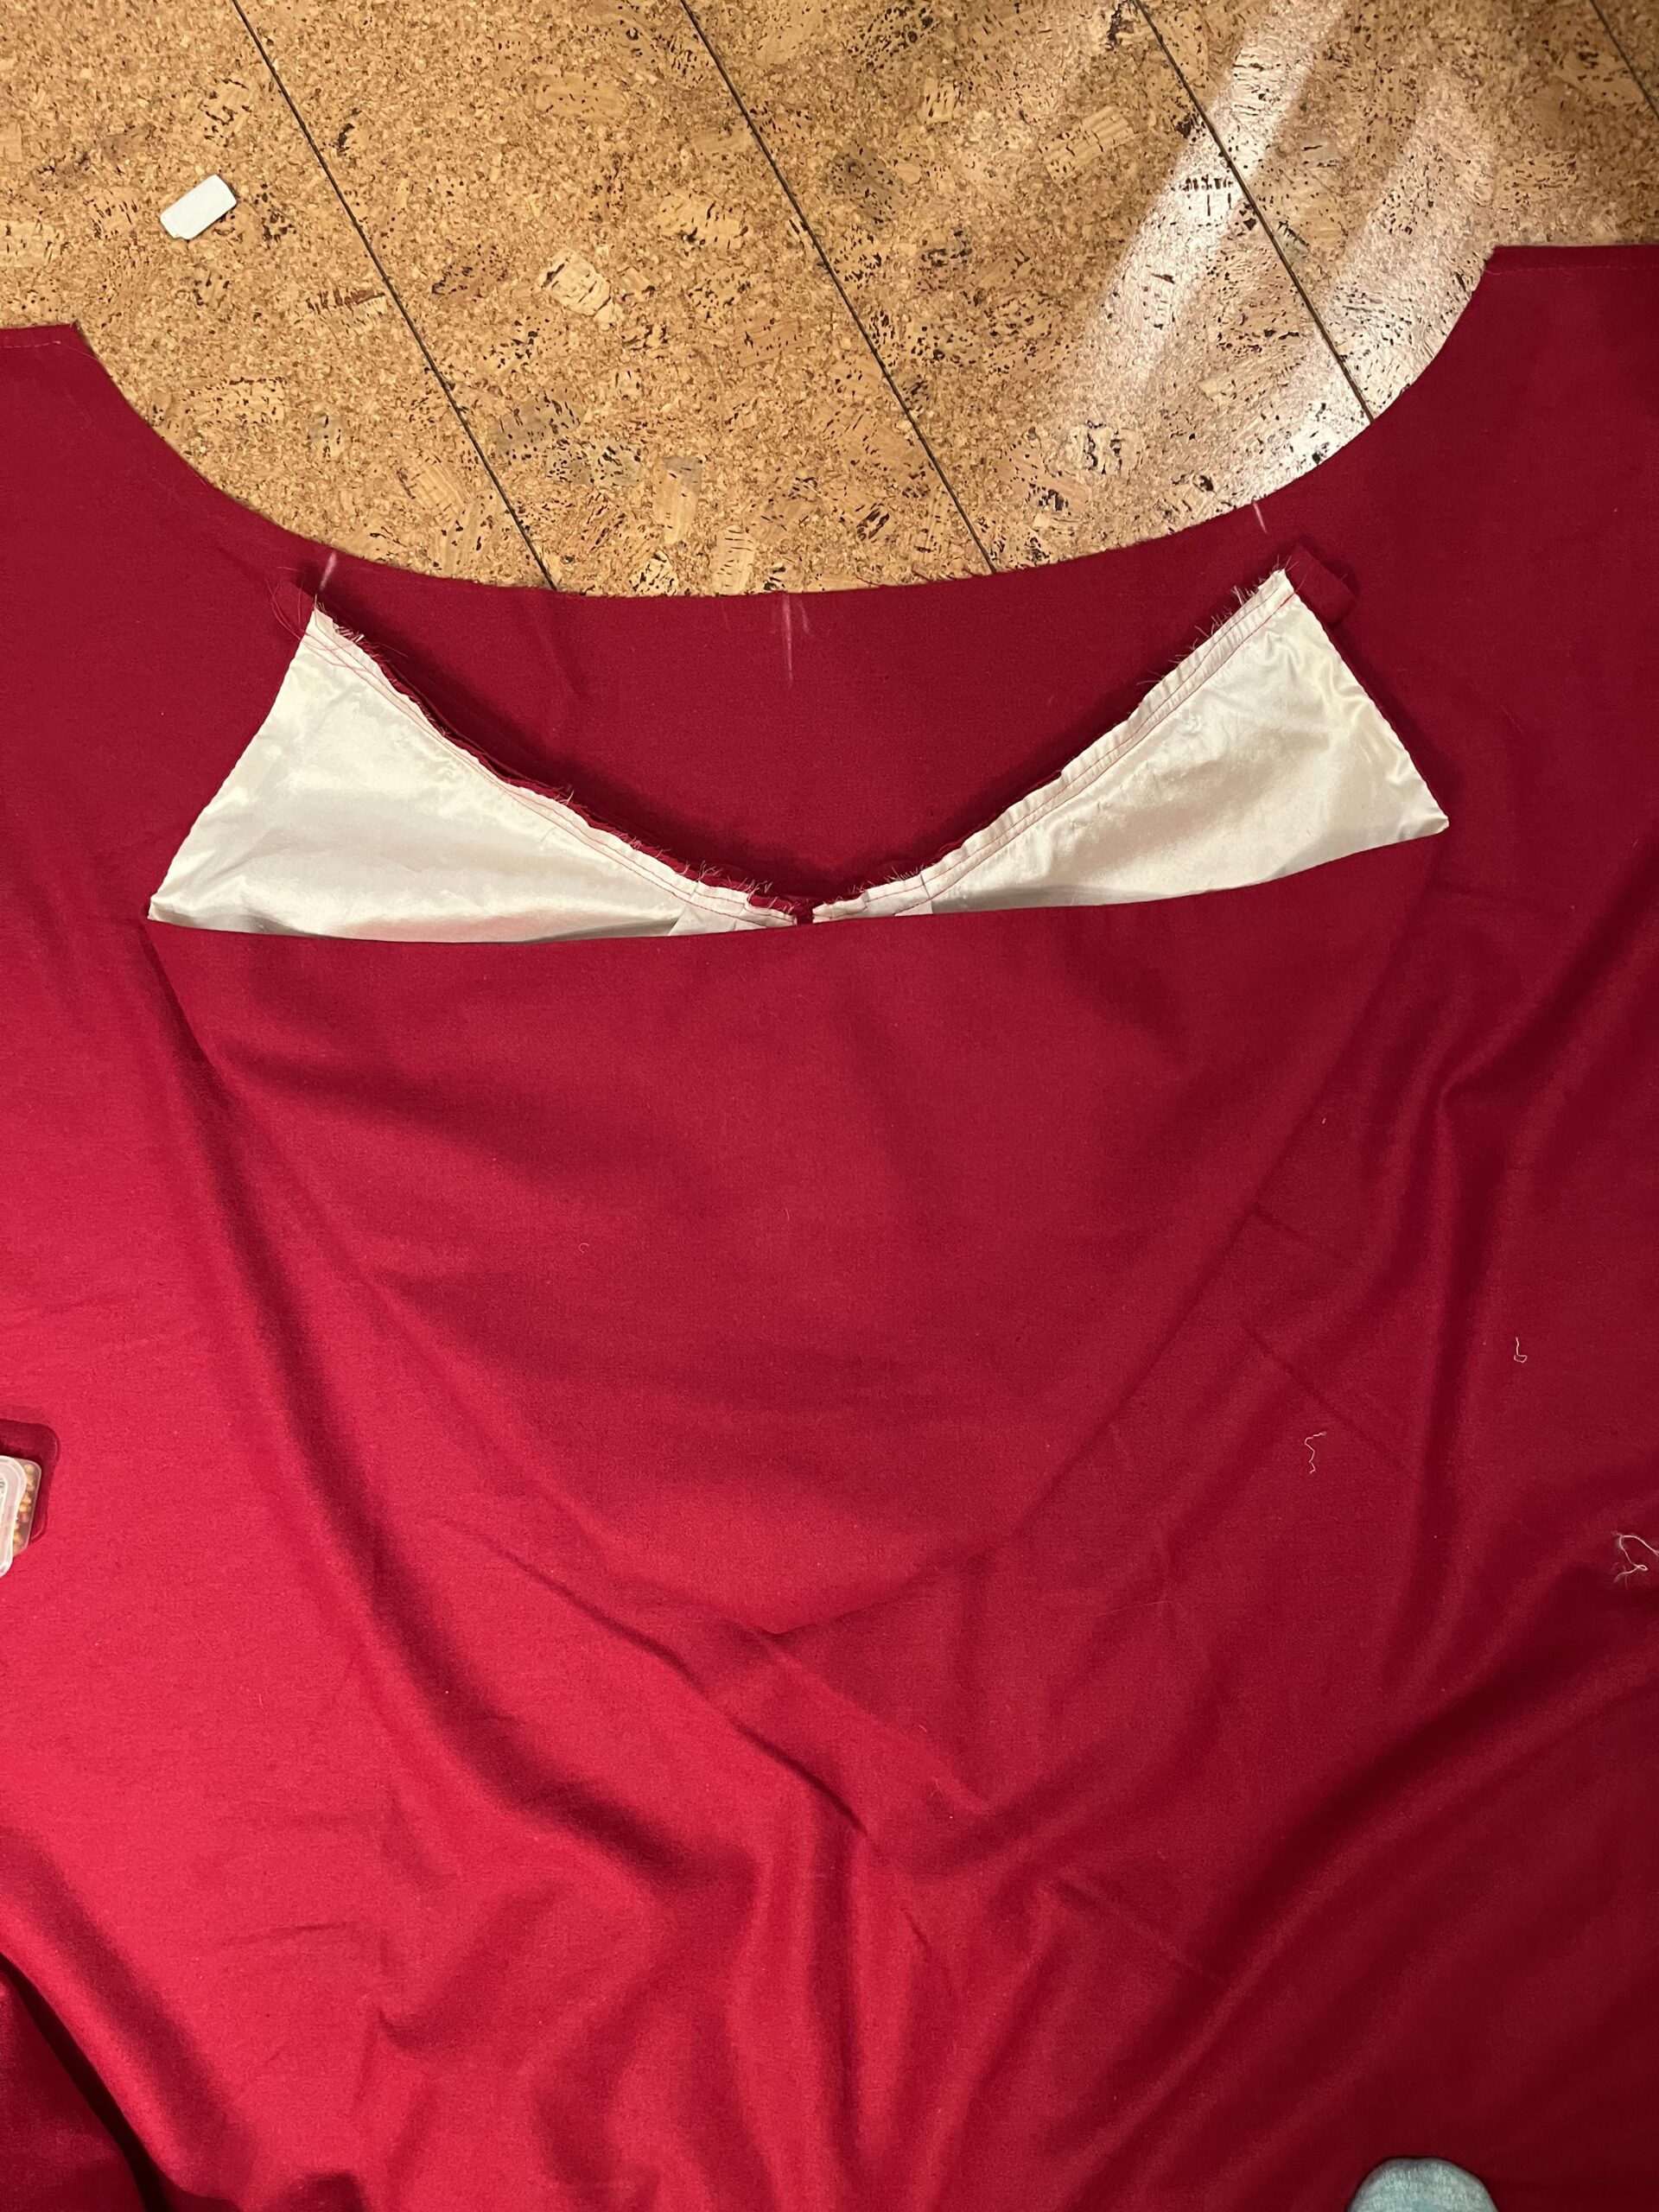 The hood of an 18th Century cardinal cloak is laid against the cloak neckhole to match center points